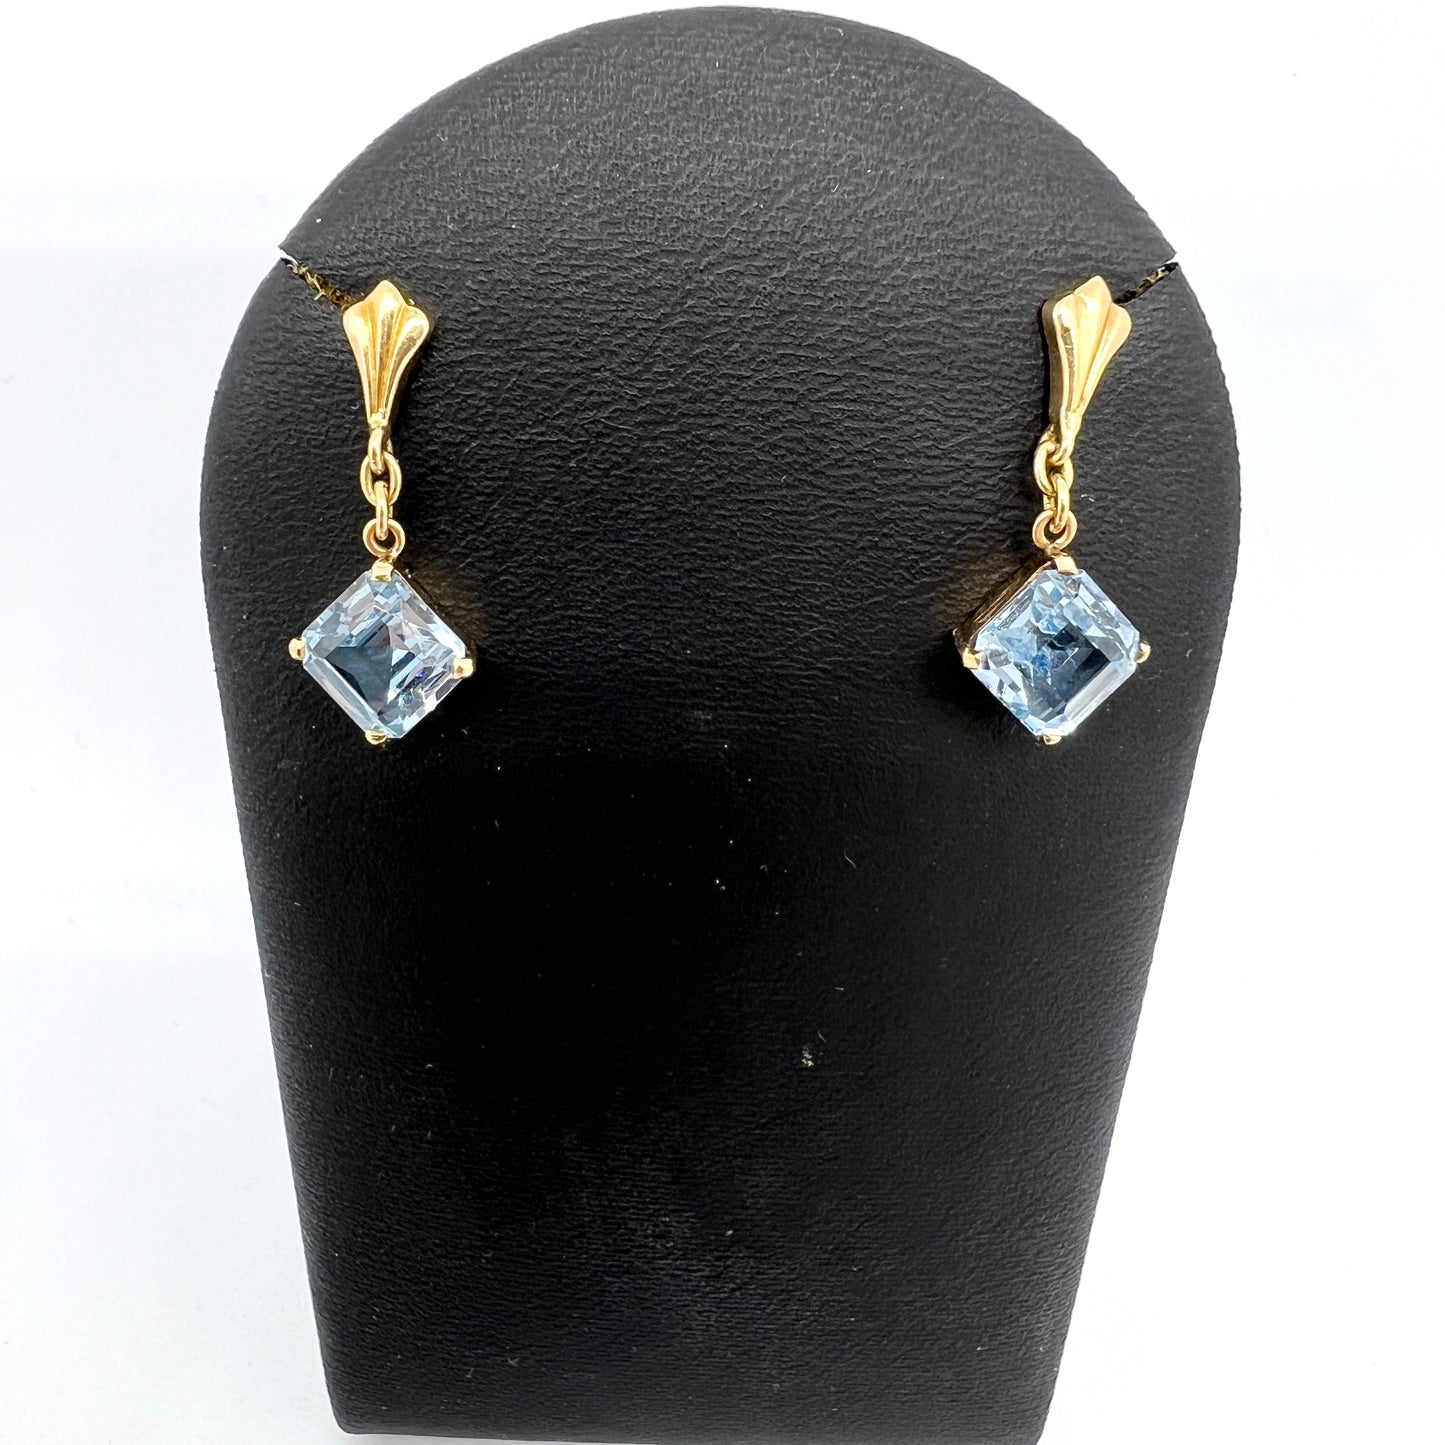 Vintage 1950s. 18k Gold Ice Blue Synthetic Spinel Earrings.